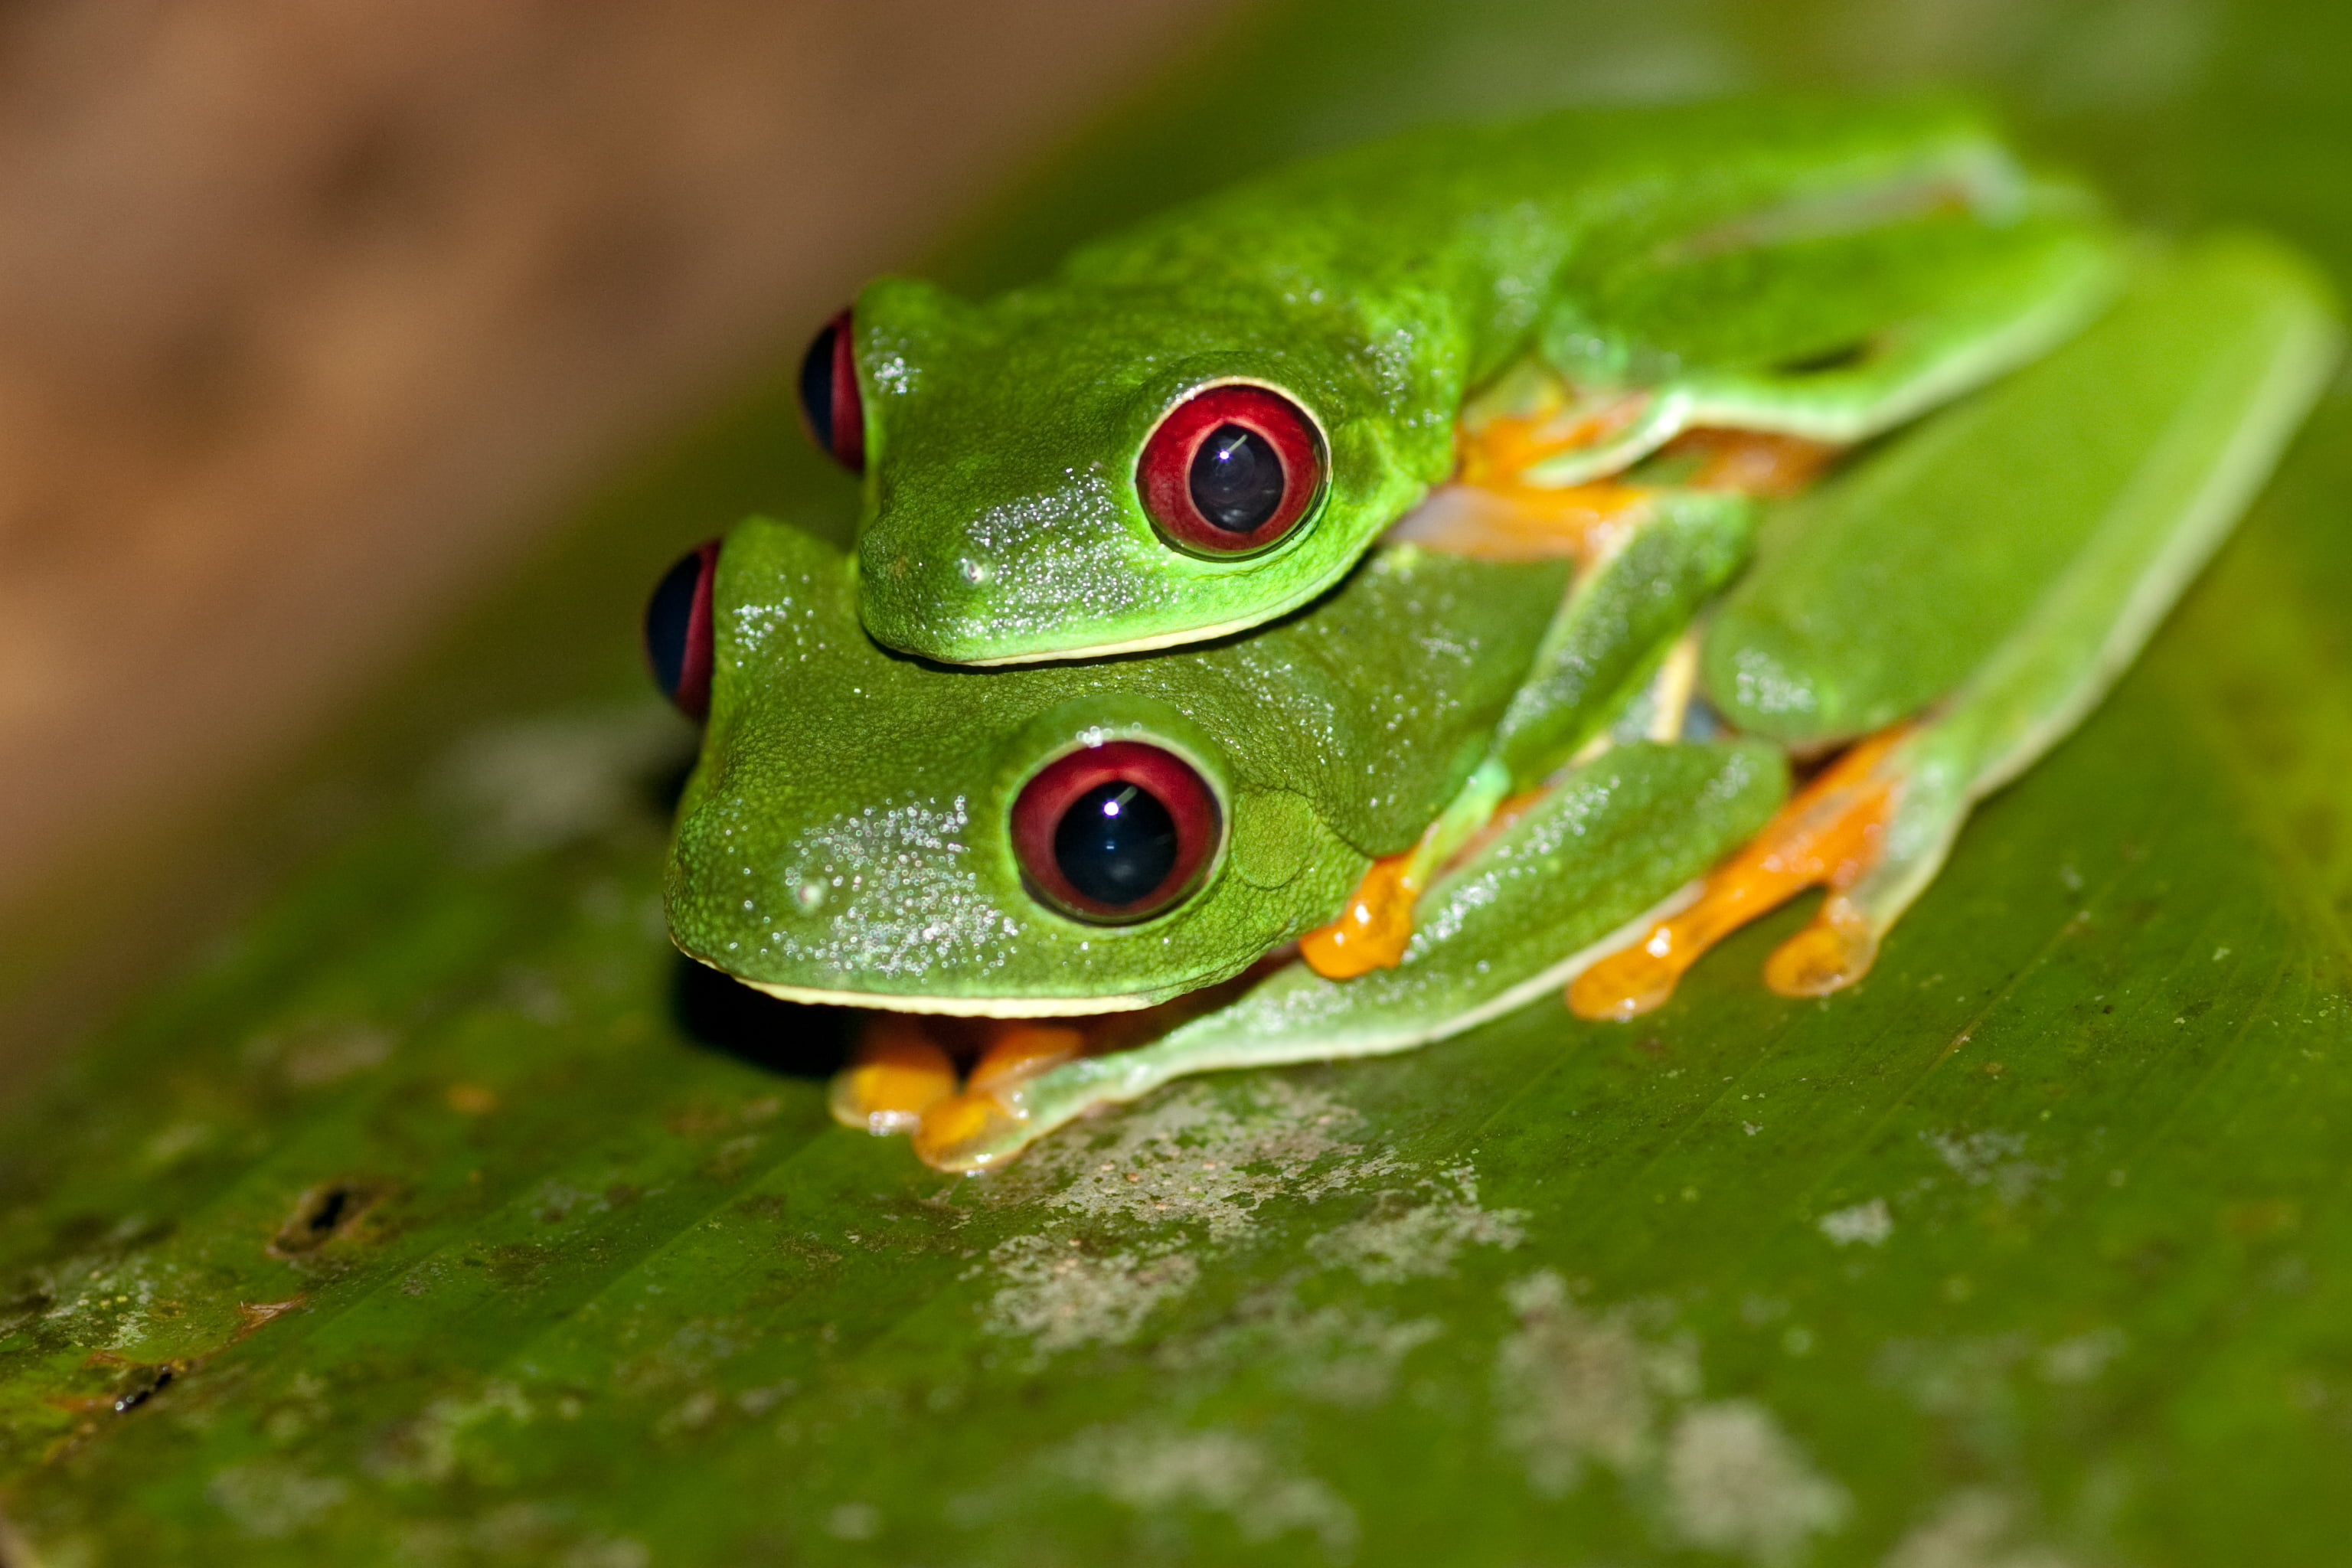 3072x2048 Two green tree frogs mating on green leaf close up photo, red-eyed tree frog, agalychnis HD wallpaper